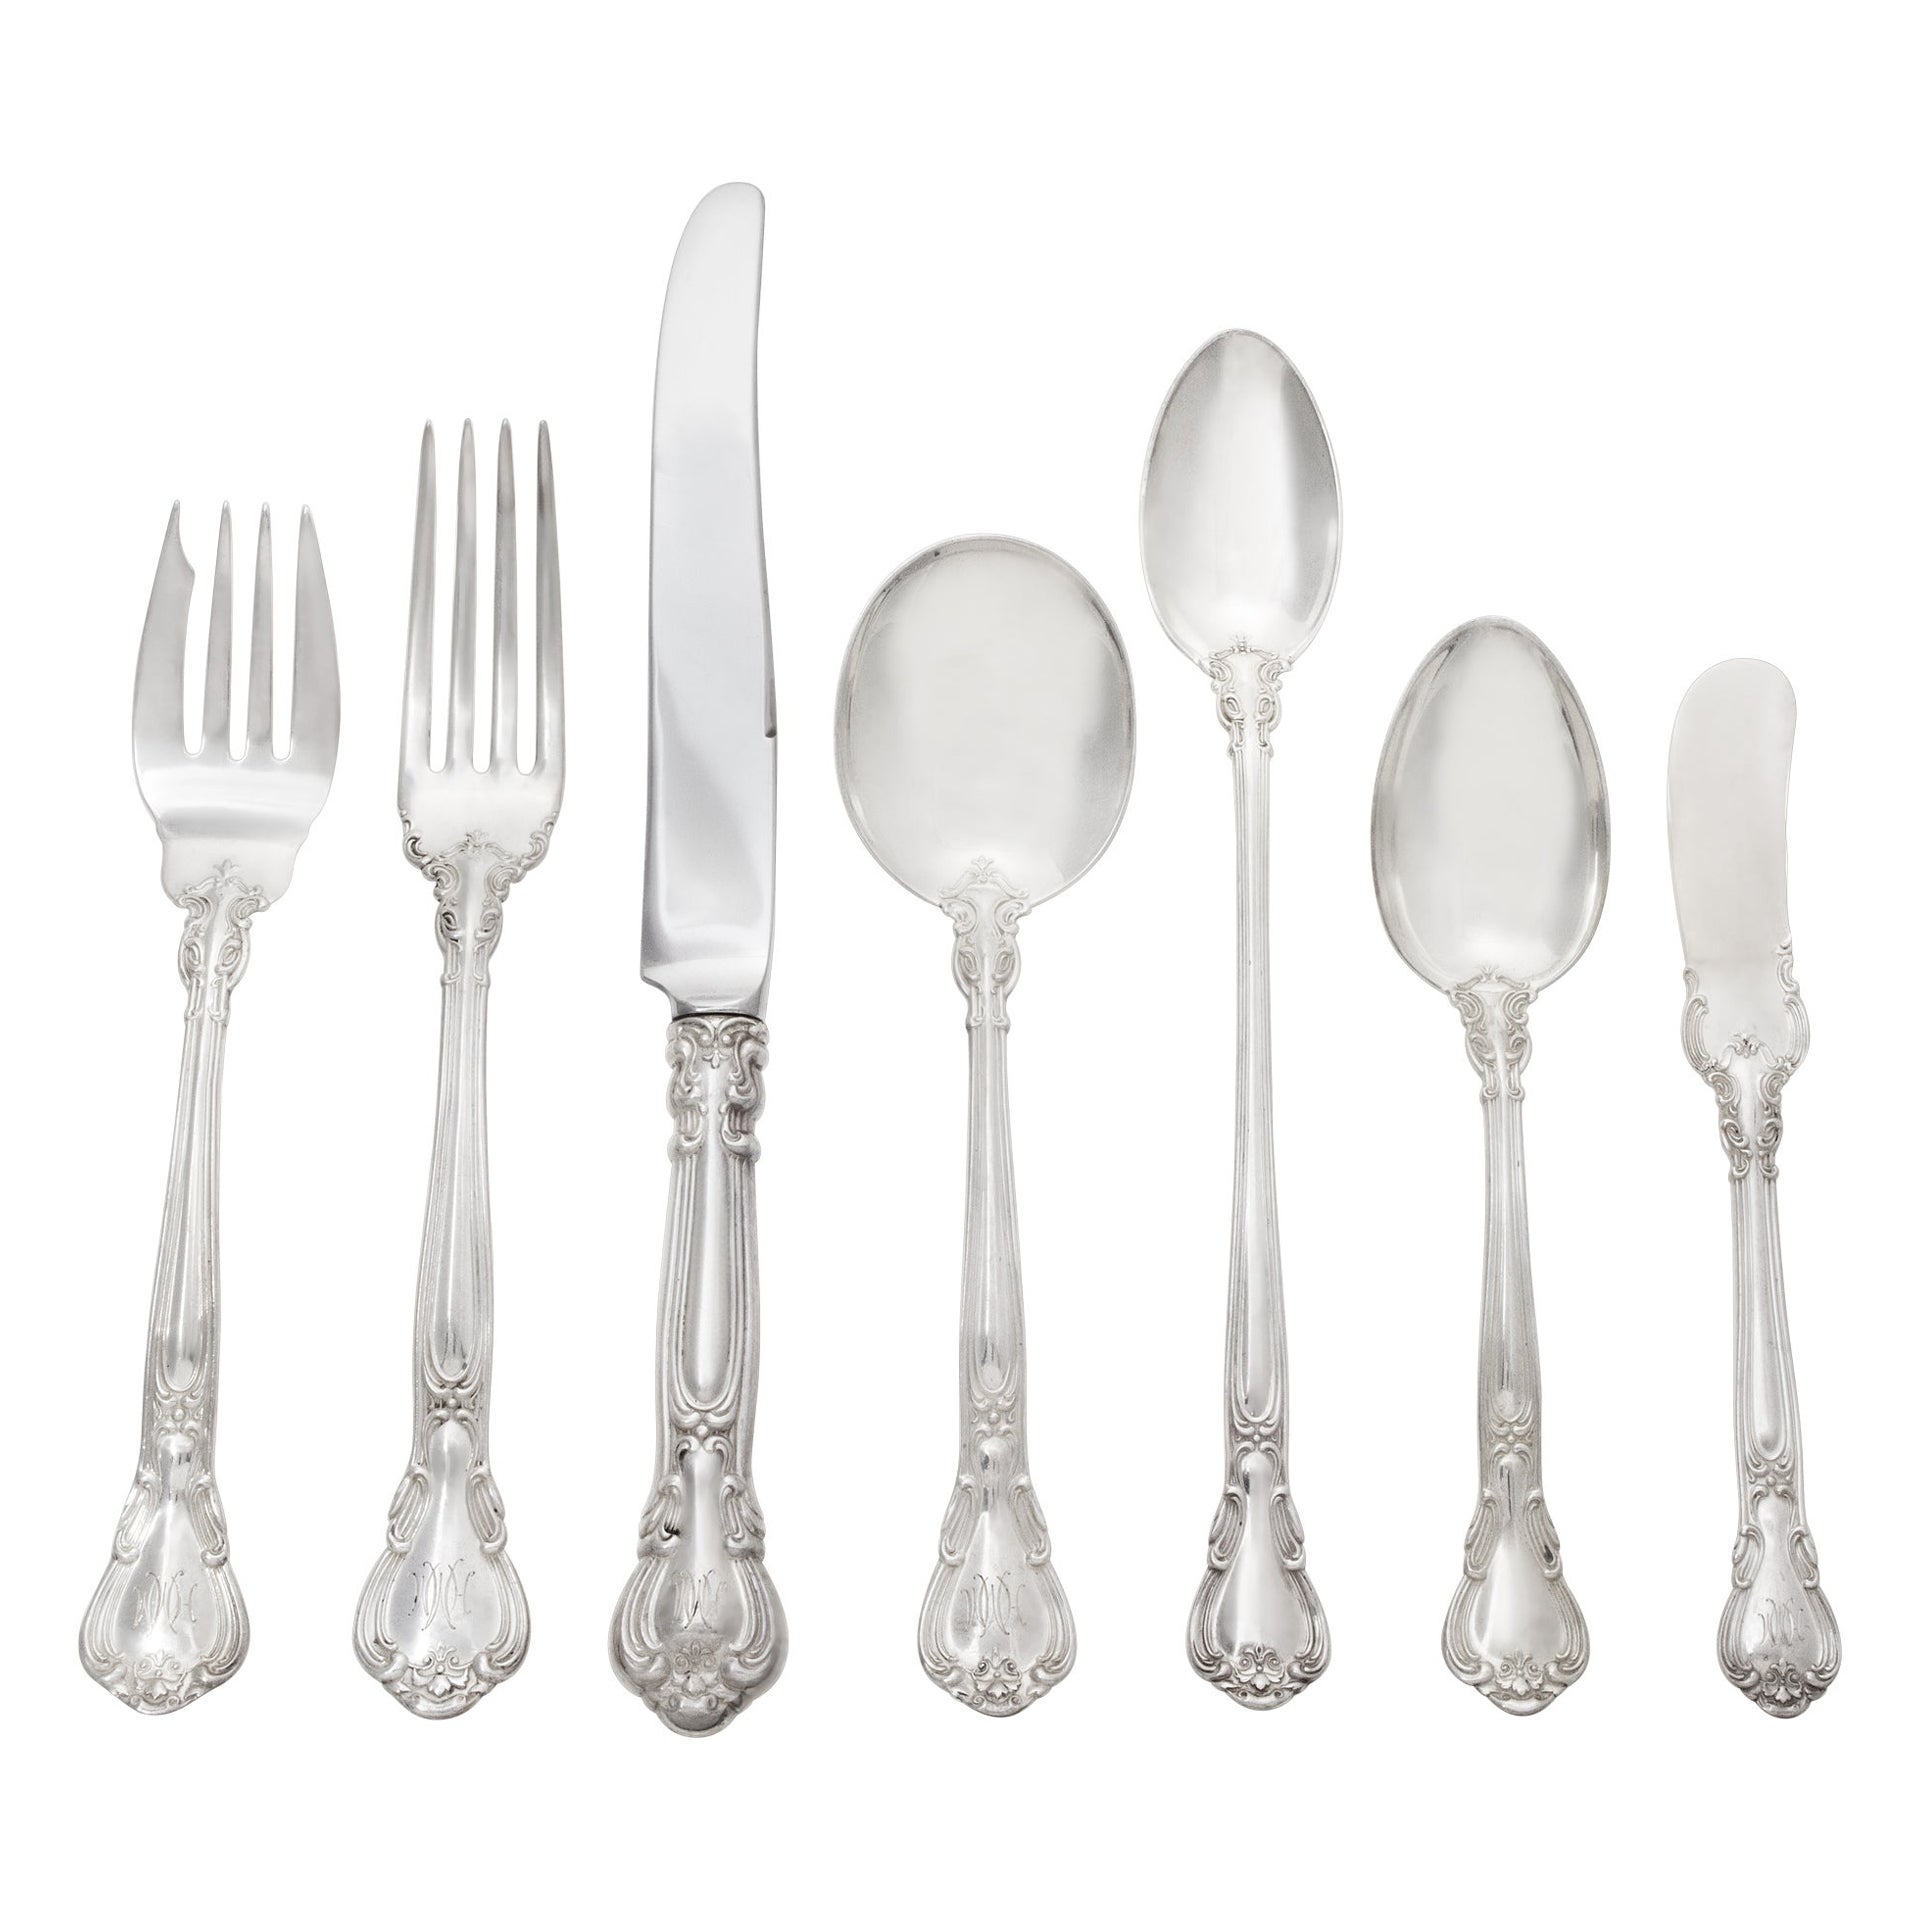 Chantilly Sterling Silver Flatware Set Patented in 1895 by Gorham, 7 Place